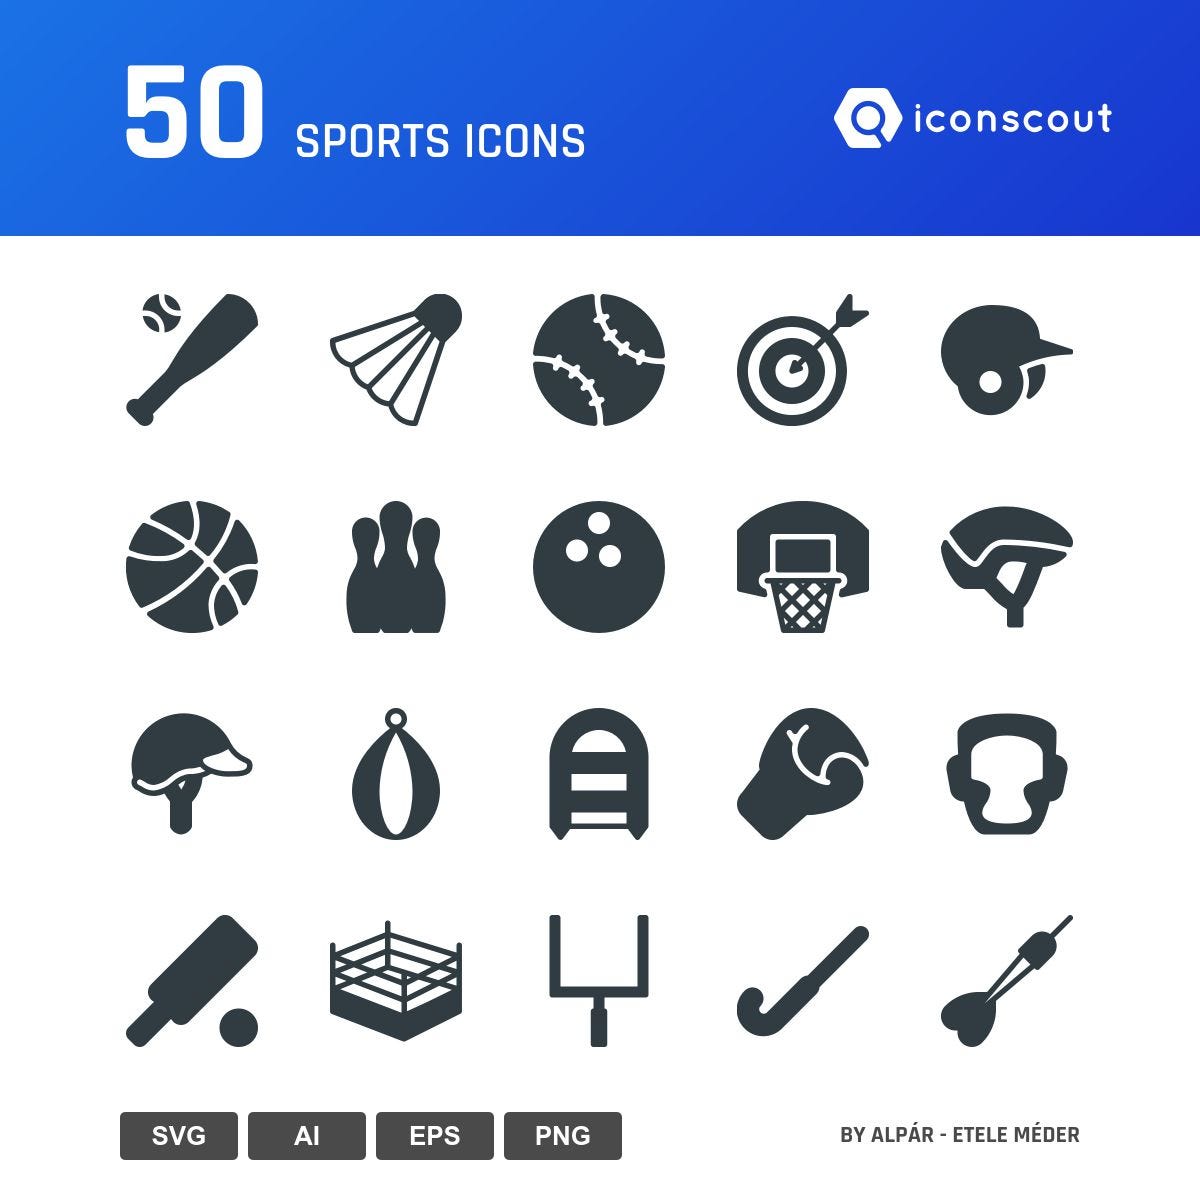 Sports Icons Vector Images (over 1.2 million)